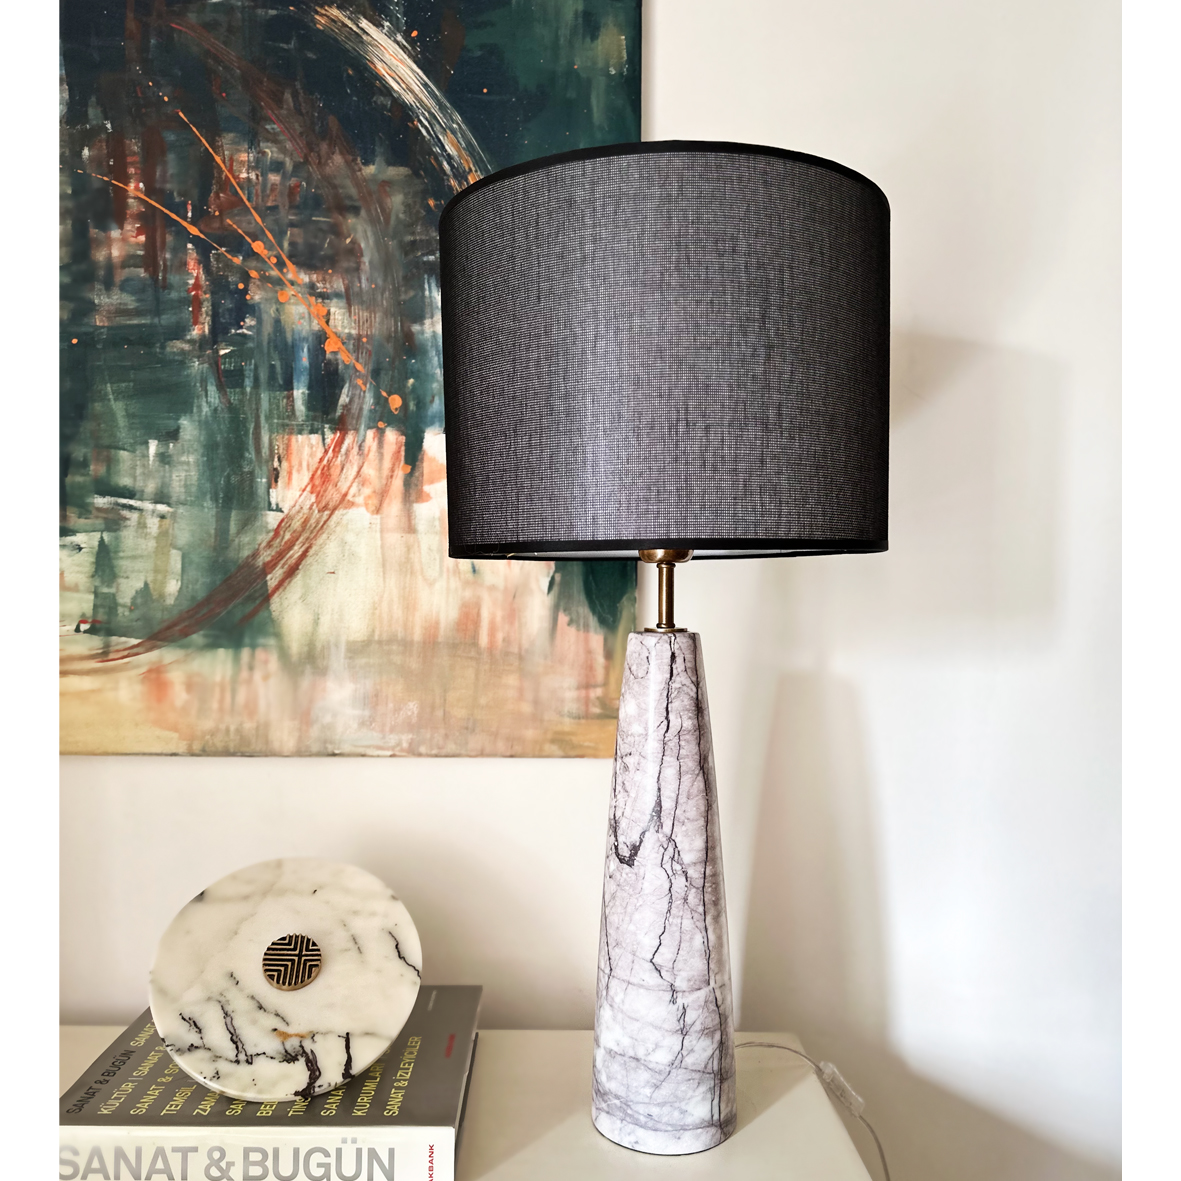 Picture of Tall Cone Black&White Table Lamp